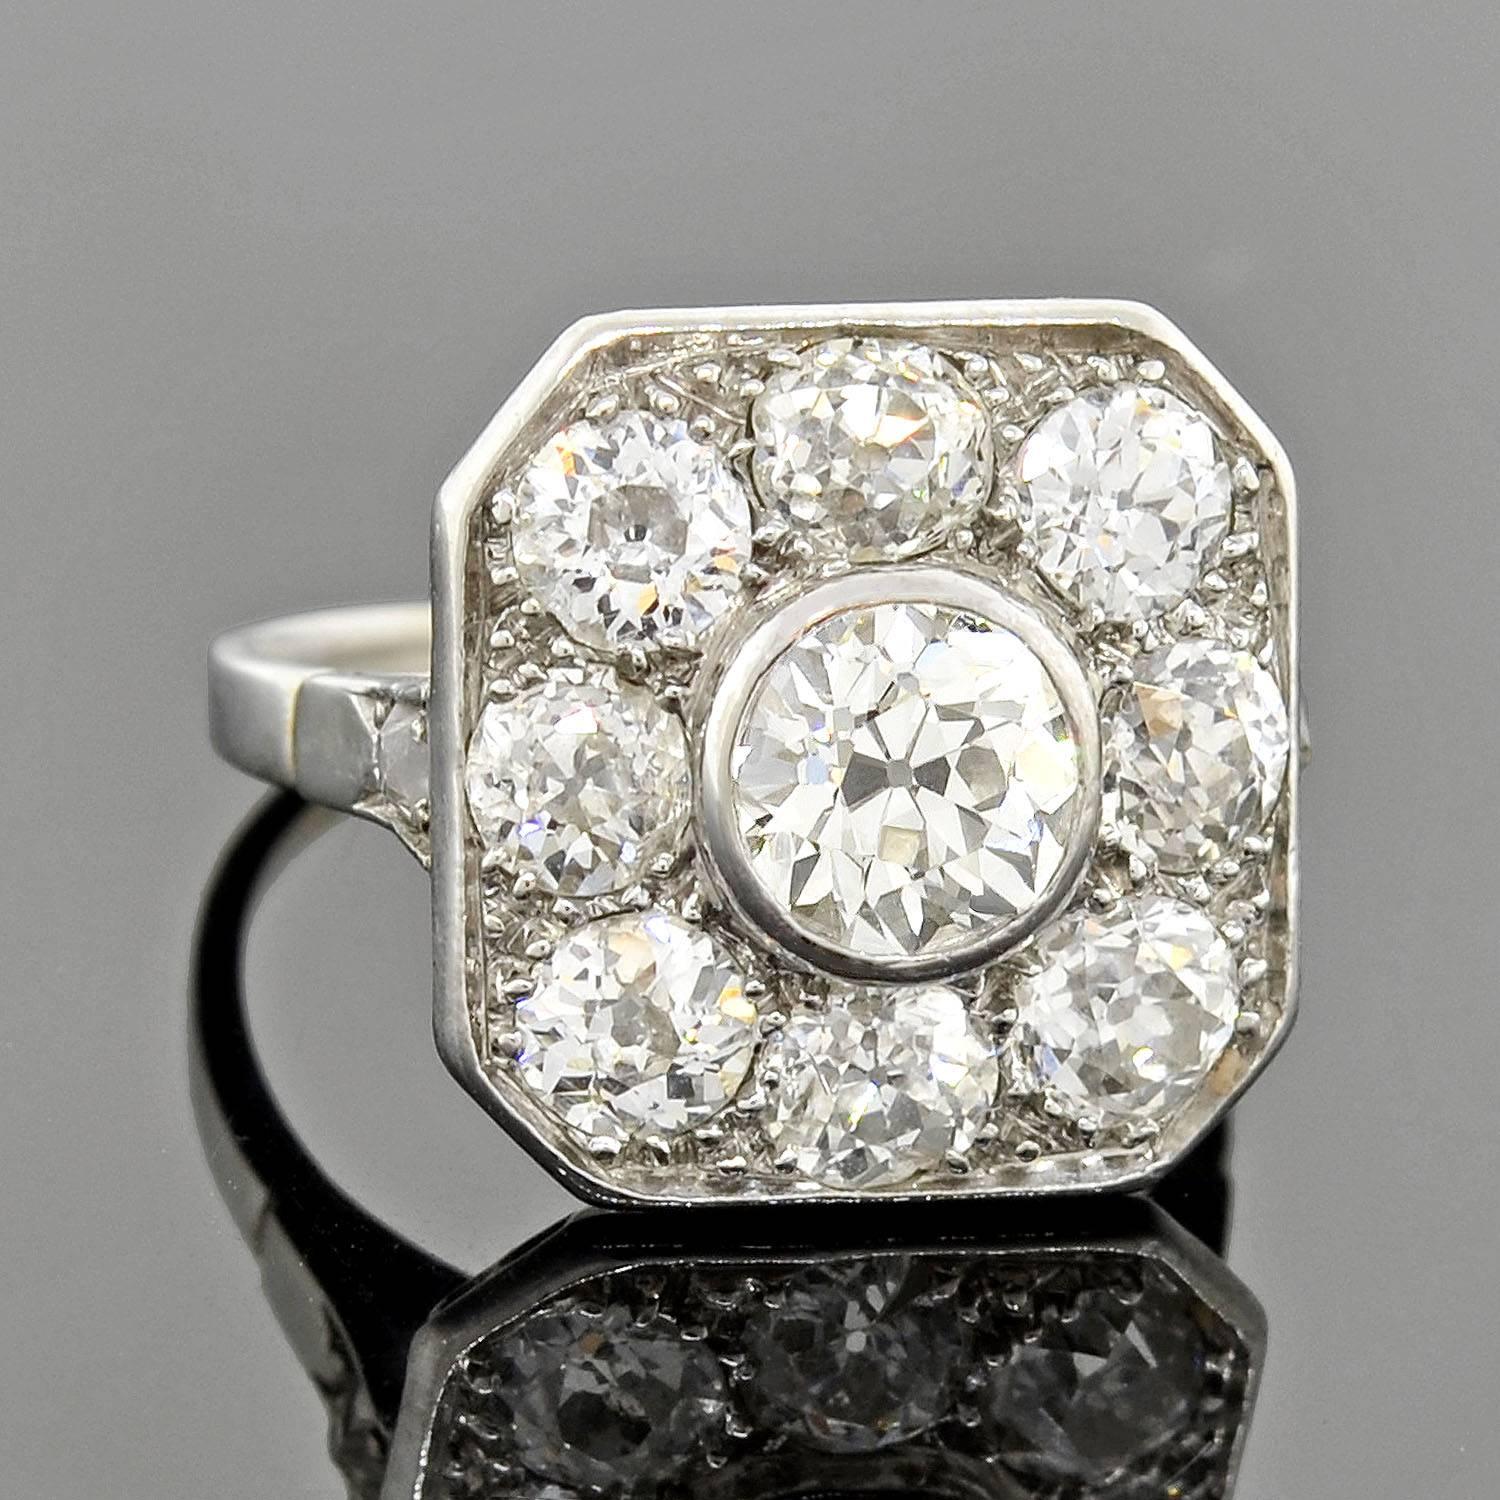 A striking diamond ring from the Edwardian (ca1910) era! This fabulous piece is made of platinum and adorns a large square-shaped face which which has clipped corners. The square centerpiece has a stunning design which is encrusted with 8 prong set